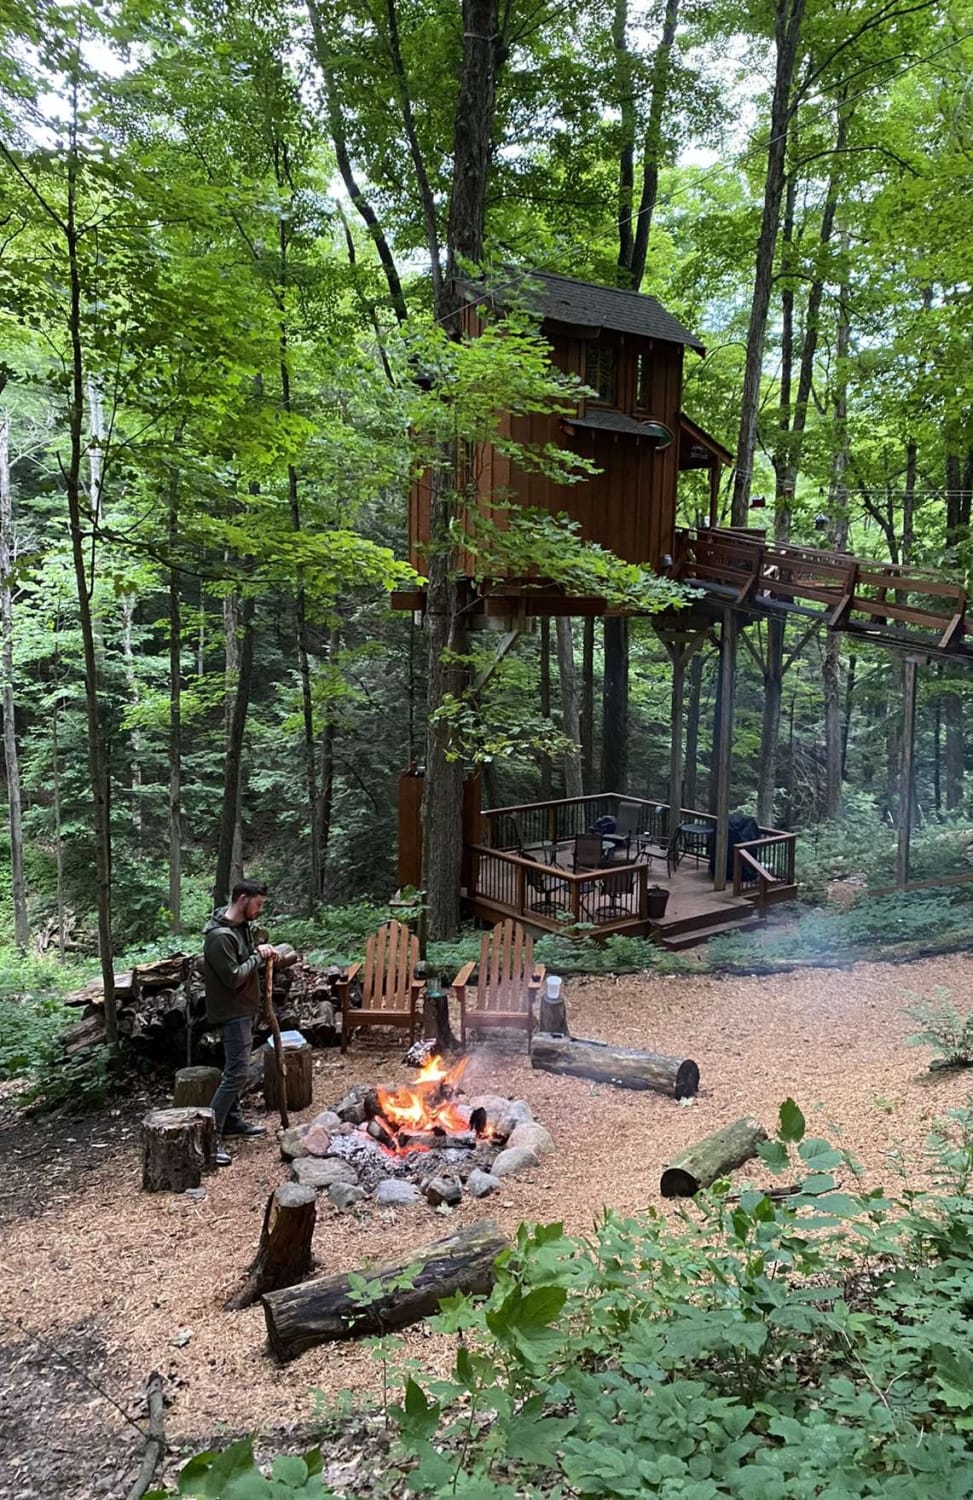 Off the grid treehouse. What the soul needed!